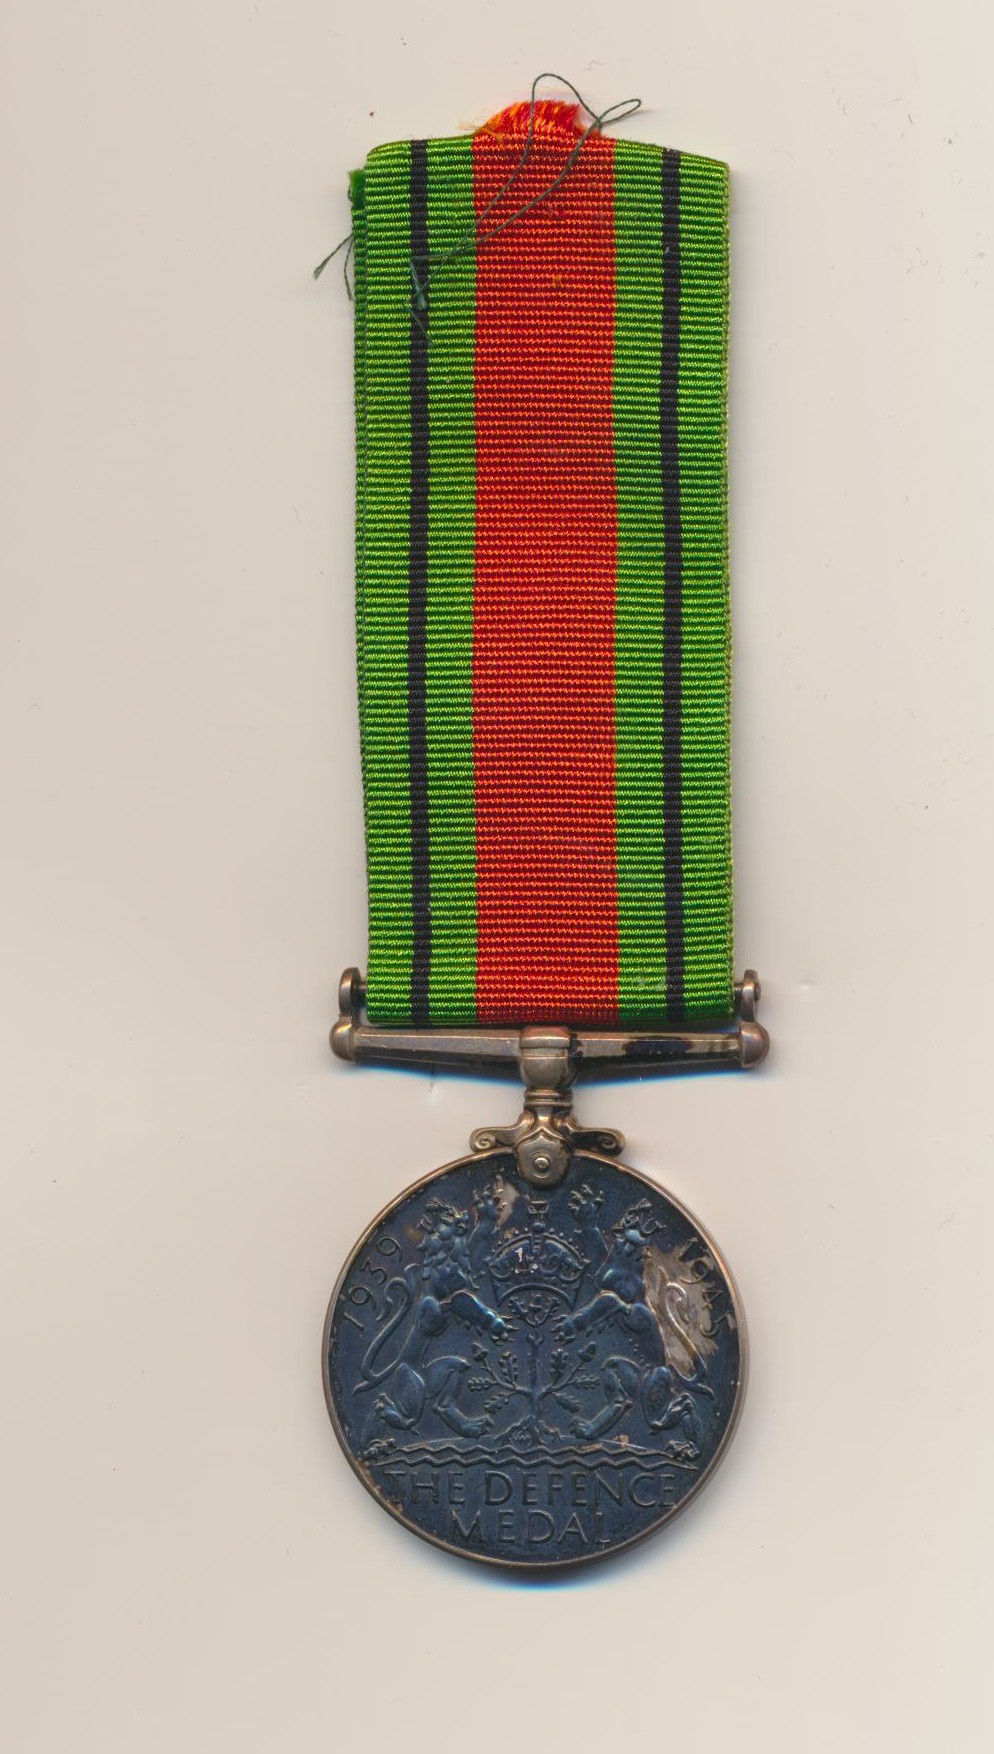 CANADIAN COMMONWEALTH 1939-45 DEFENCE MEDAL